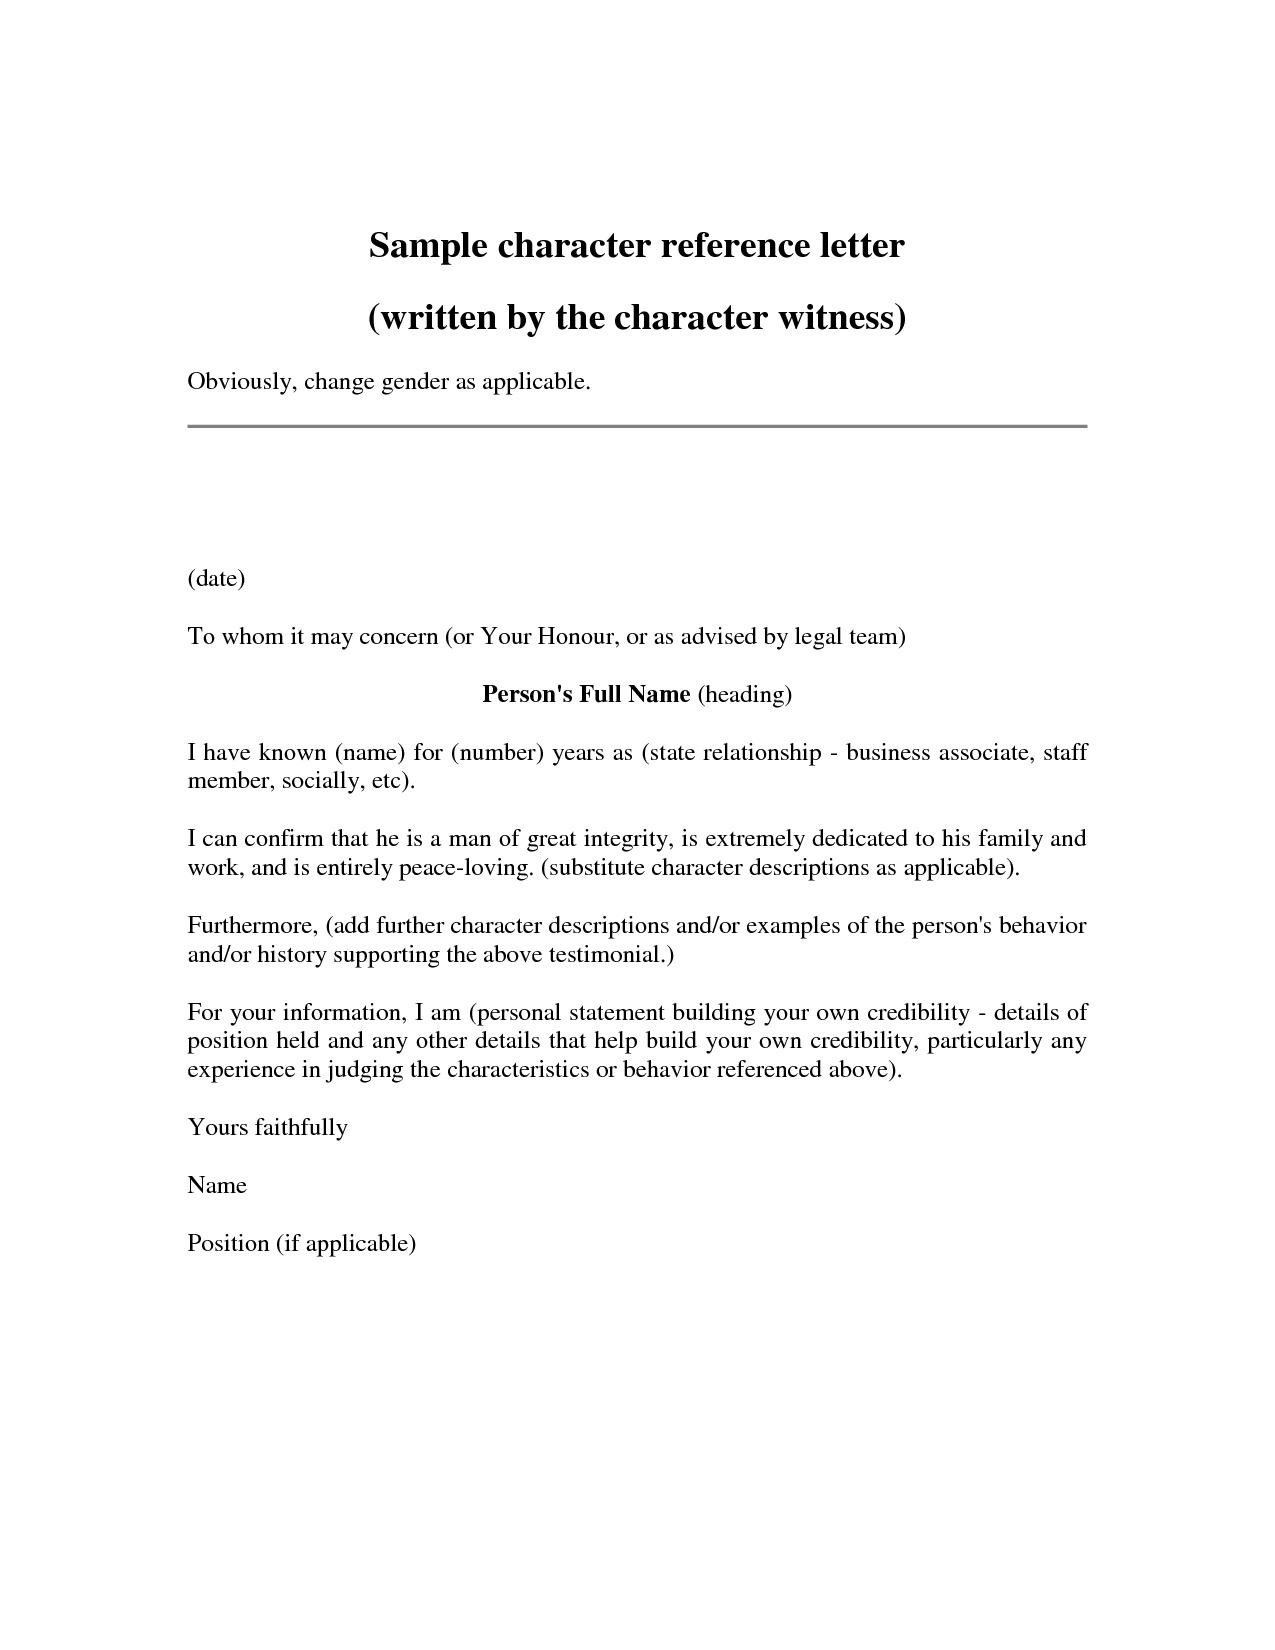 personal reference letters examples   Mini.mfagency.co